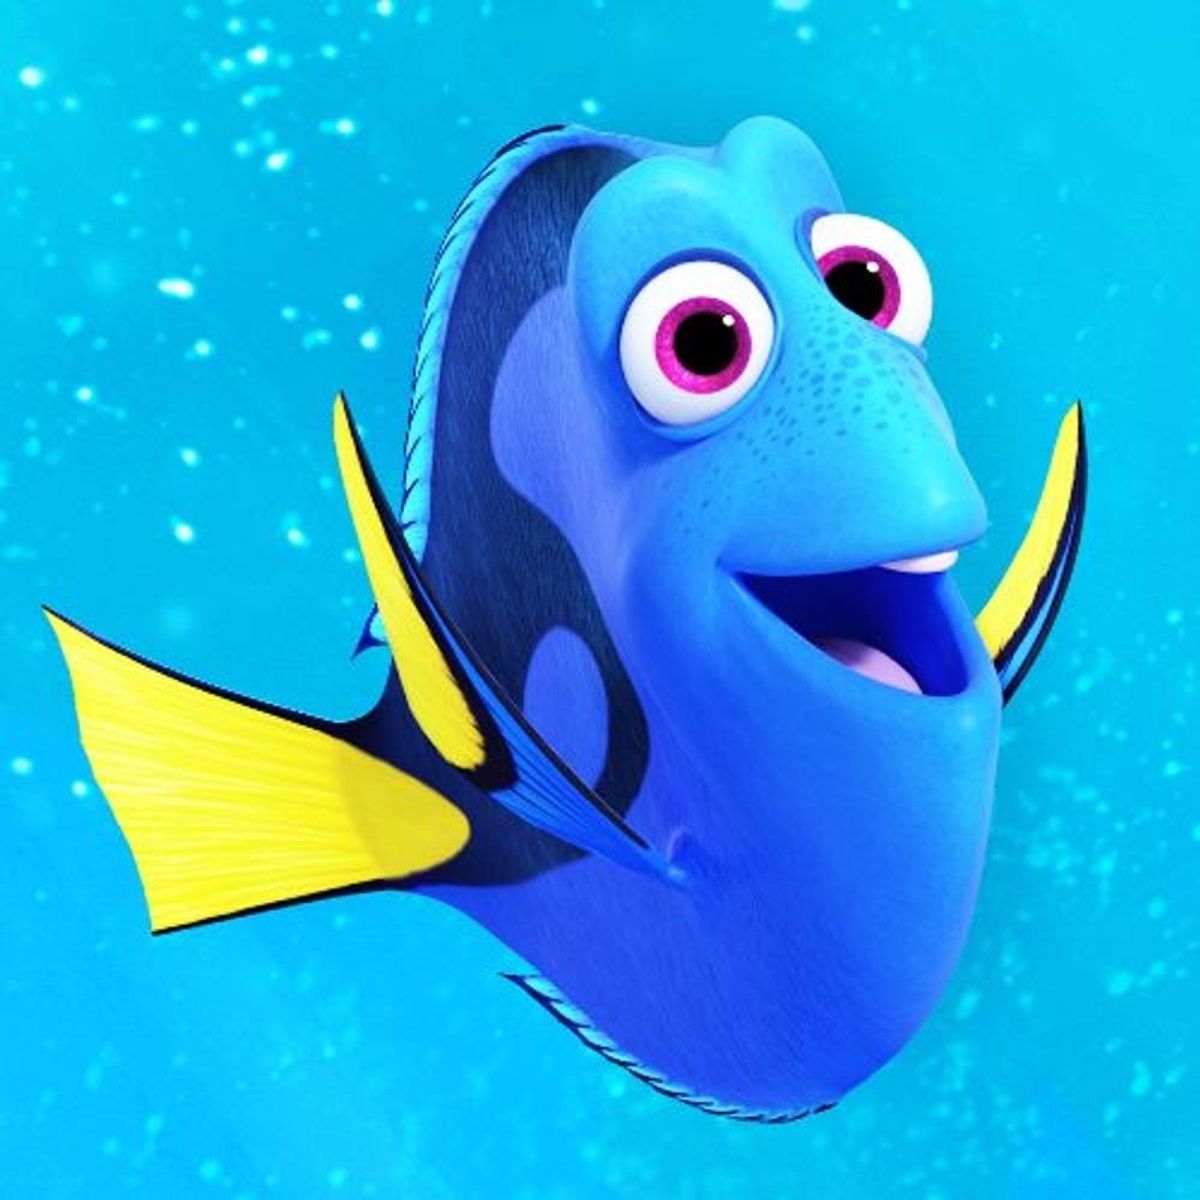 The New Finding Dory Trailer Will Hit You in the Feels